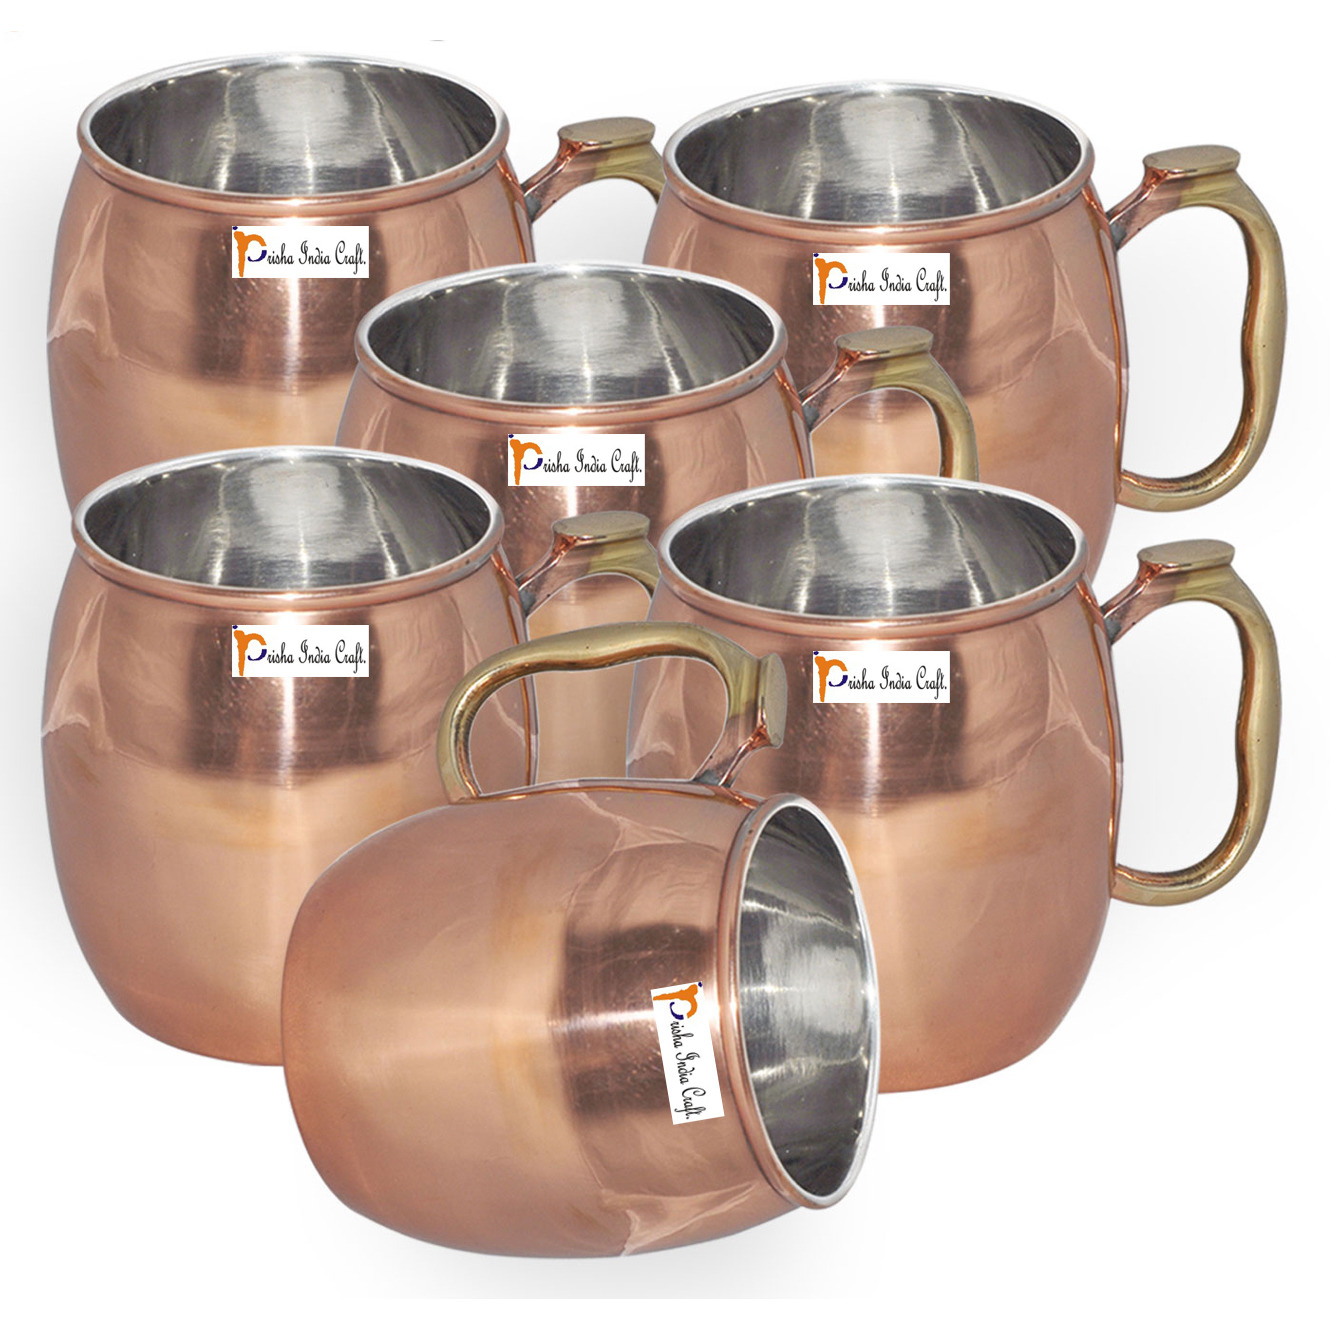 Set of 6 - Prisha India Craft B. Copper Plating Stainless Steel Best Quality MuleMug 550 ML / 18, Thumb HandlePremium Moscow Mule Copper Mug,Moscow Mule Cocktail Cup, Copper Mugs, Cocktail Mugs